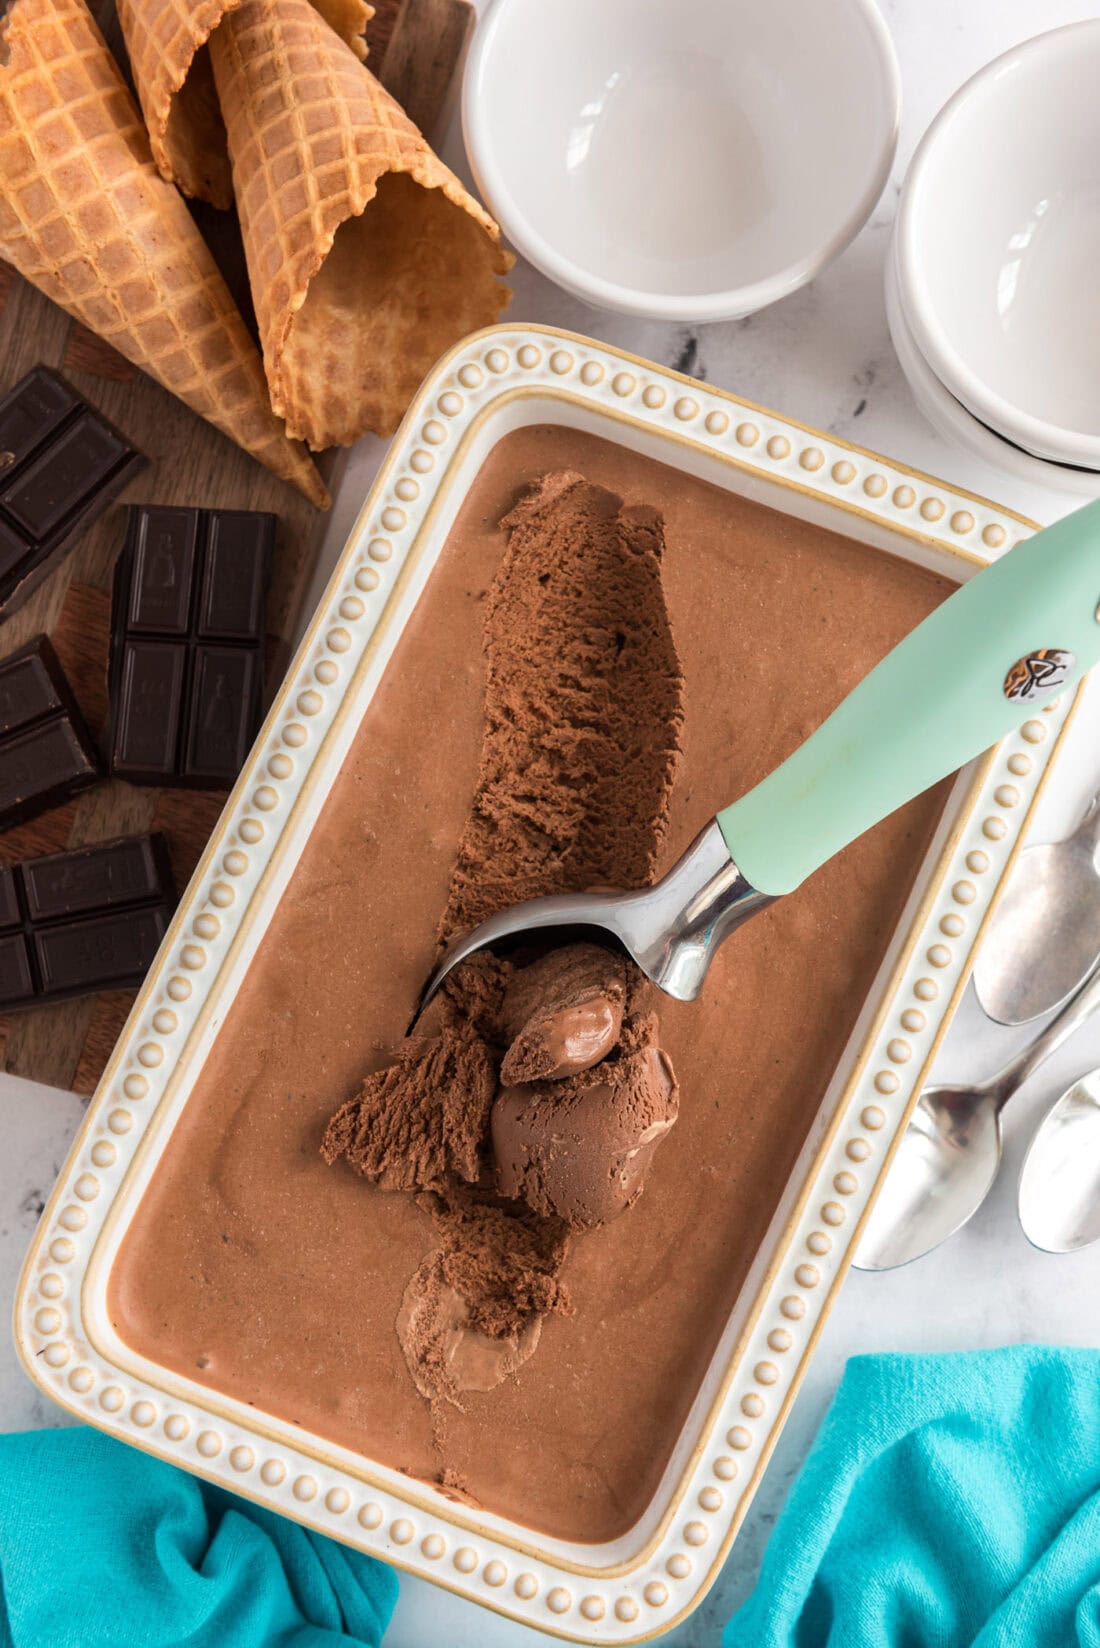 Container of Homemade Chocolate Ice Cream with an ice cream scooper in it